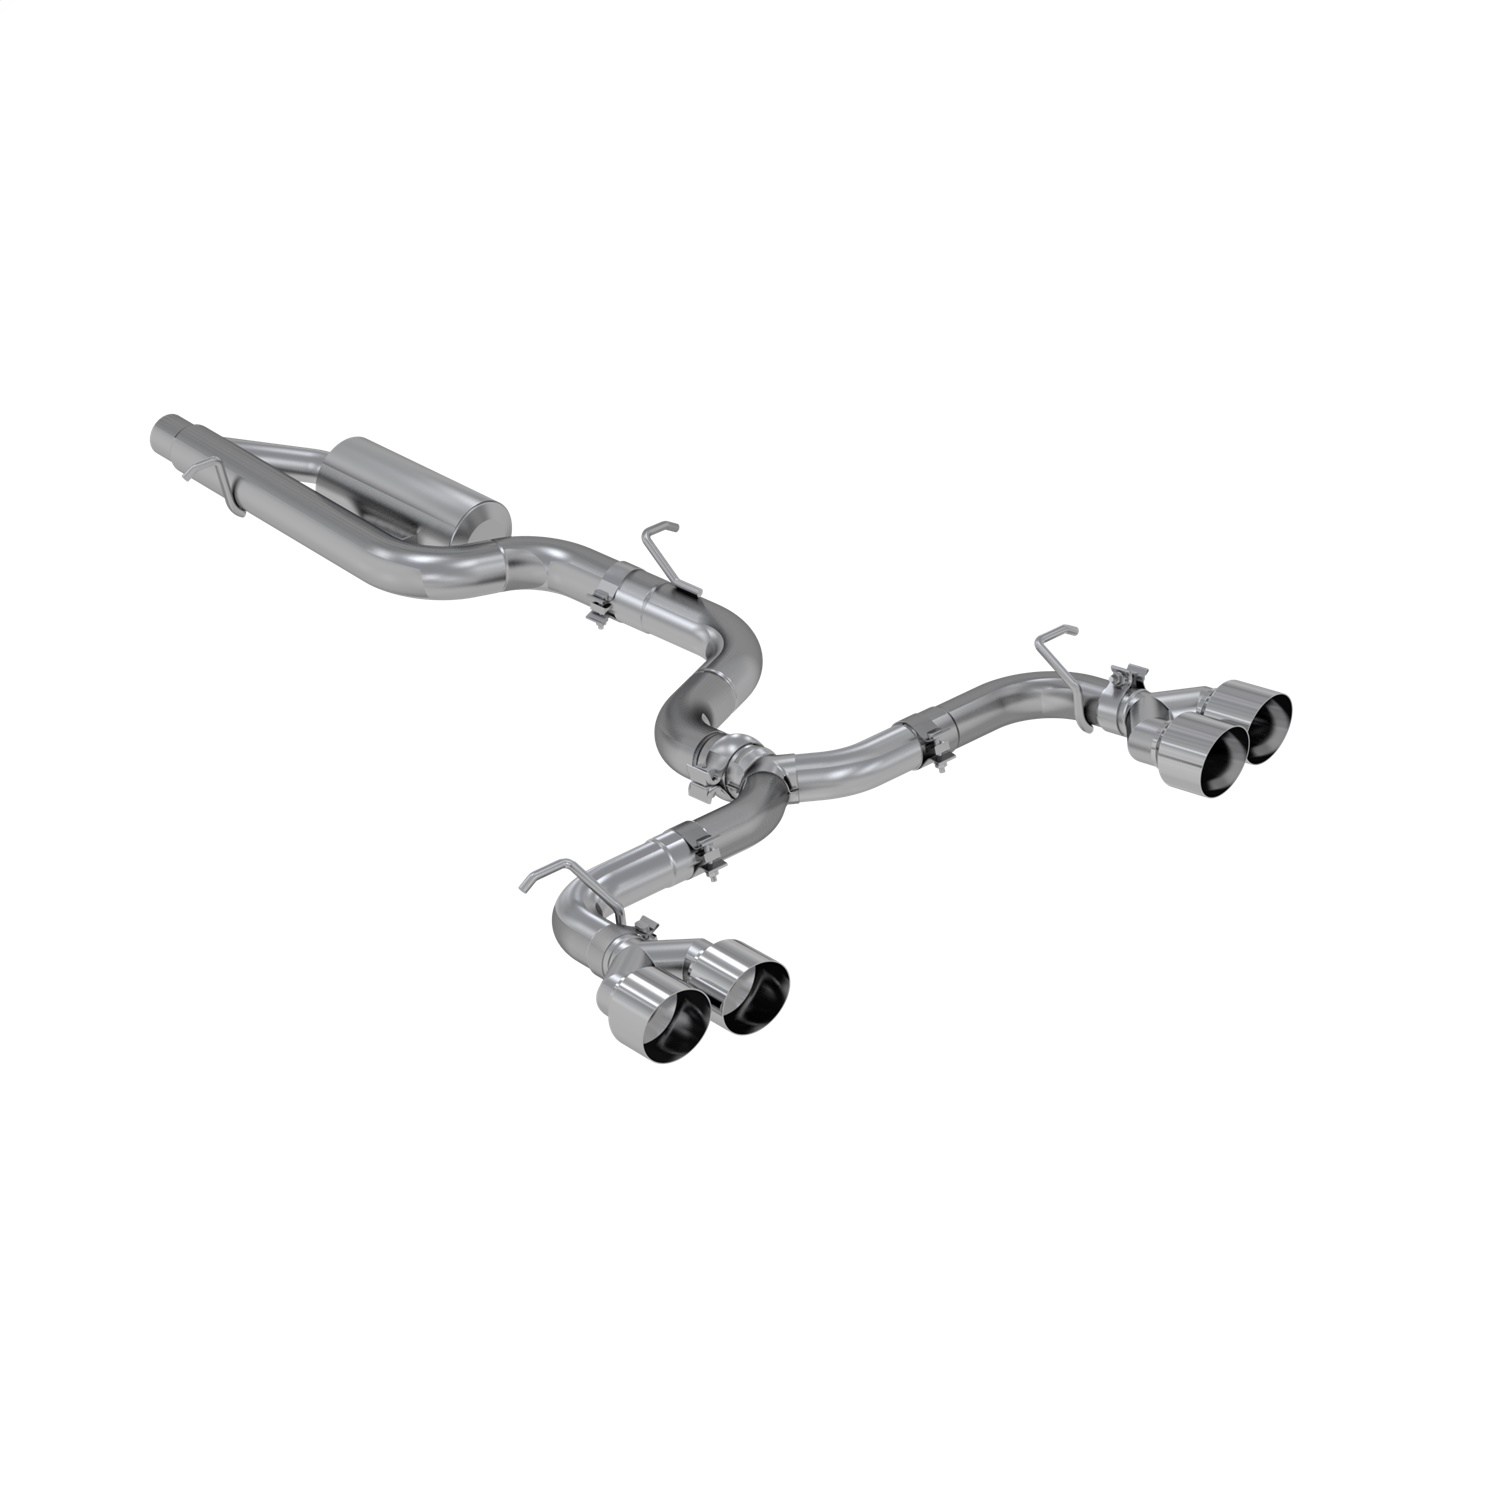 MBRP Exhaust S4603304 Armor Pro Cat Back Exhaust System Fits 15-19 Golf R